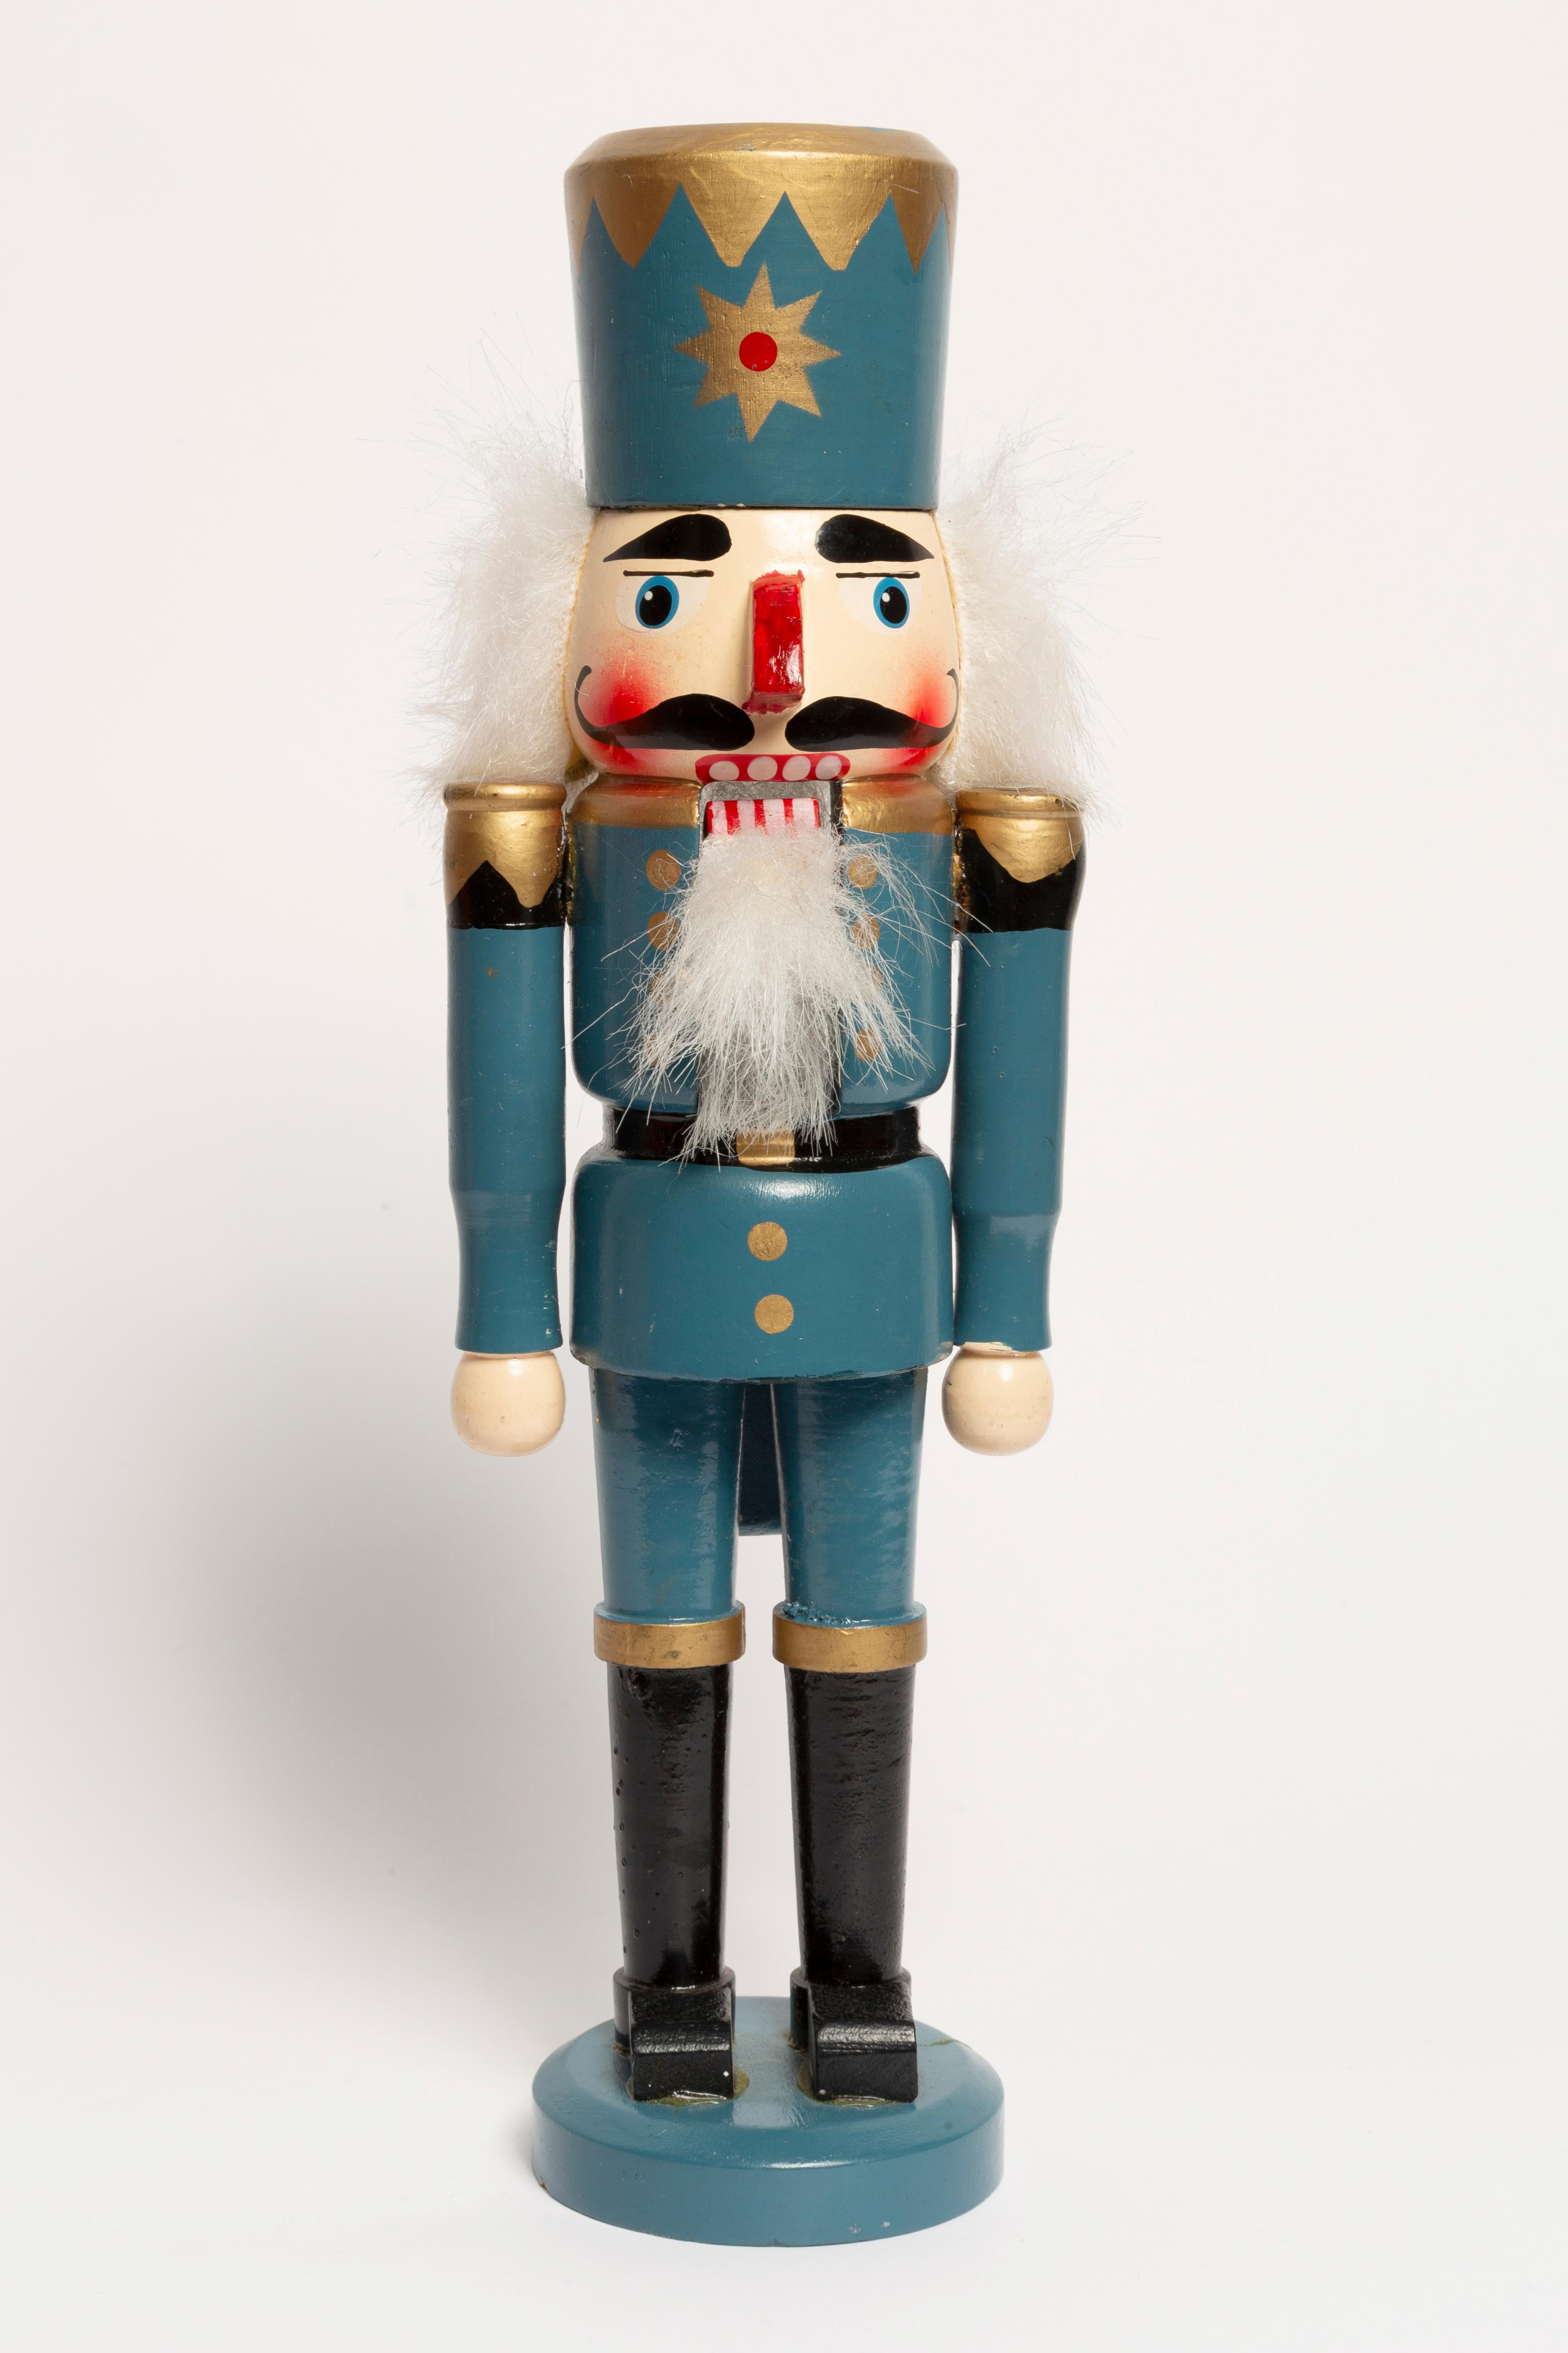 Small wooden nutcracker figure from the Erzgebirge. The region Erzgebirge formerly Eastern Germany is famous for this special kind of nutcrackers, where intricate carving has been their home. Completely hand-painted in bright colors and decorated